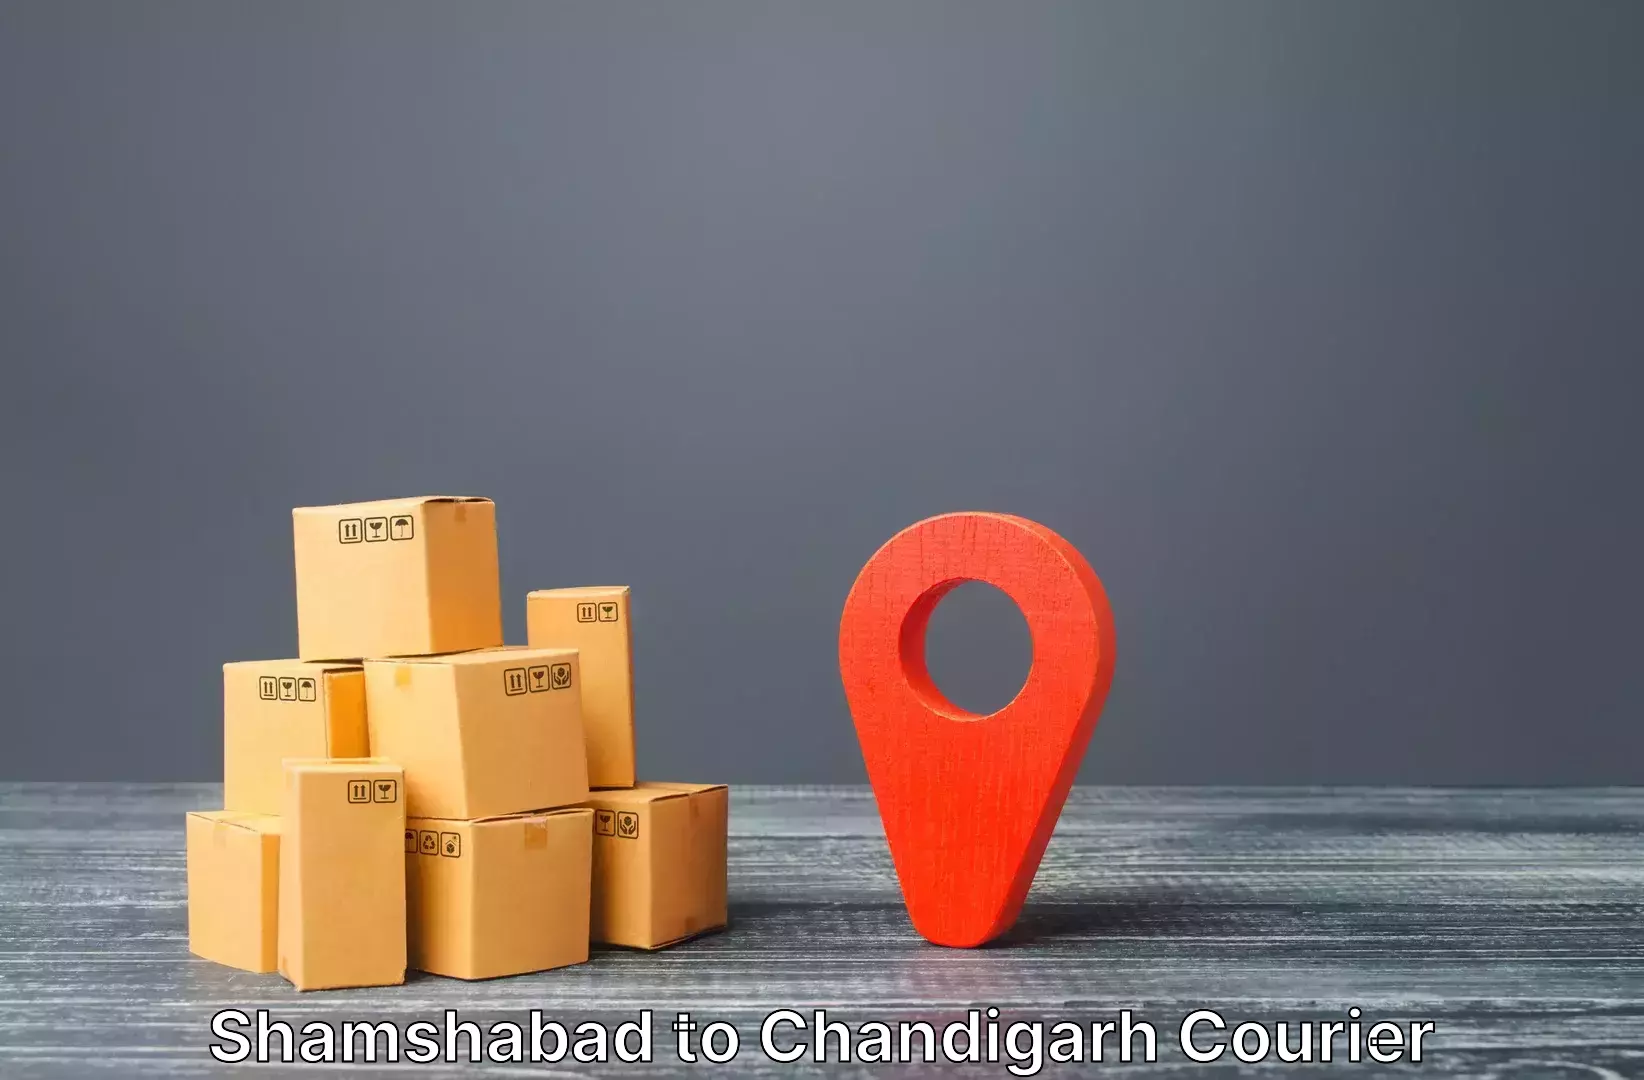 Luggage delivery optimization in Shamshabad to Chandigarh